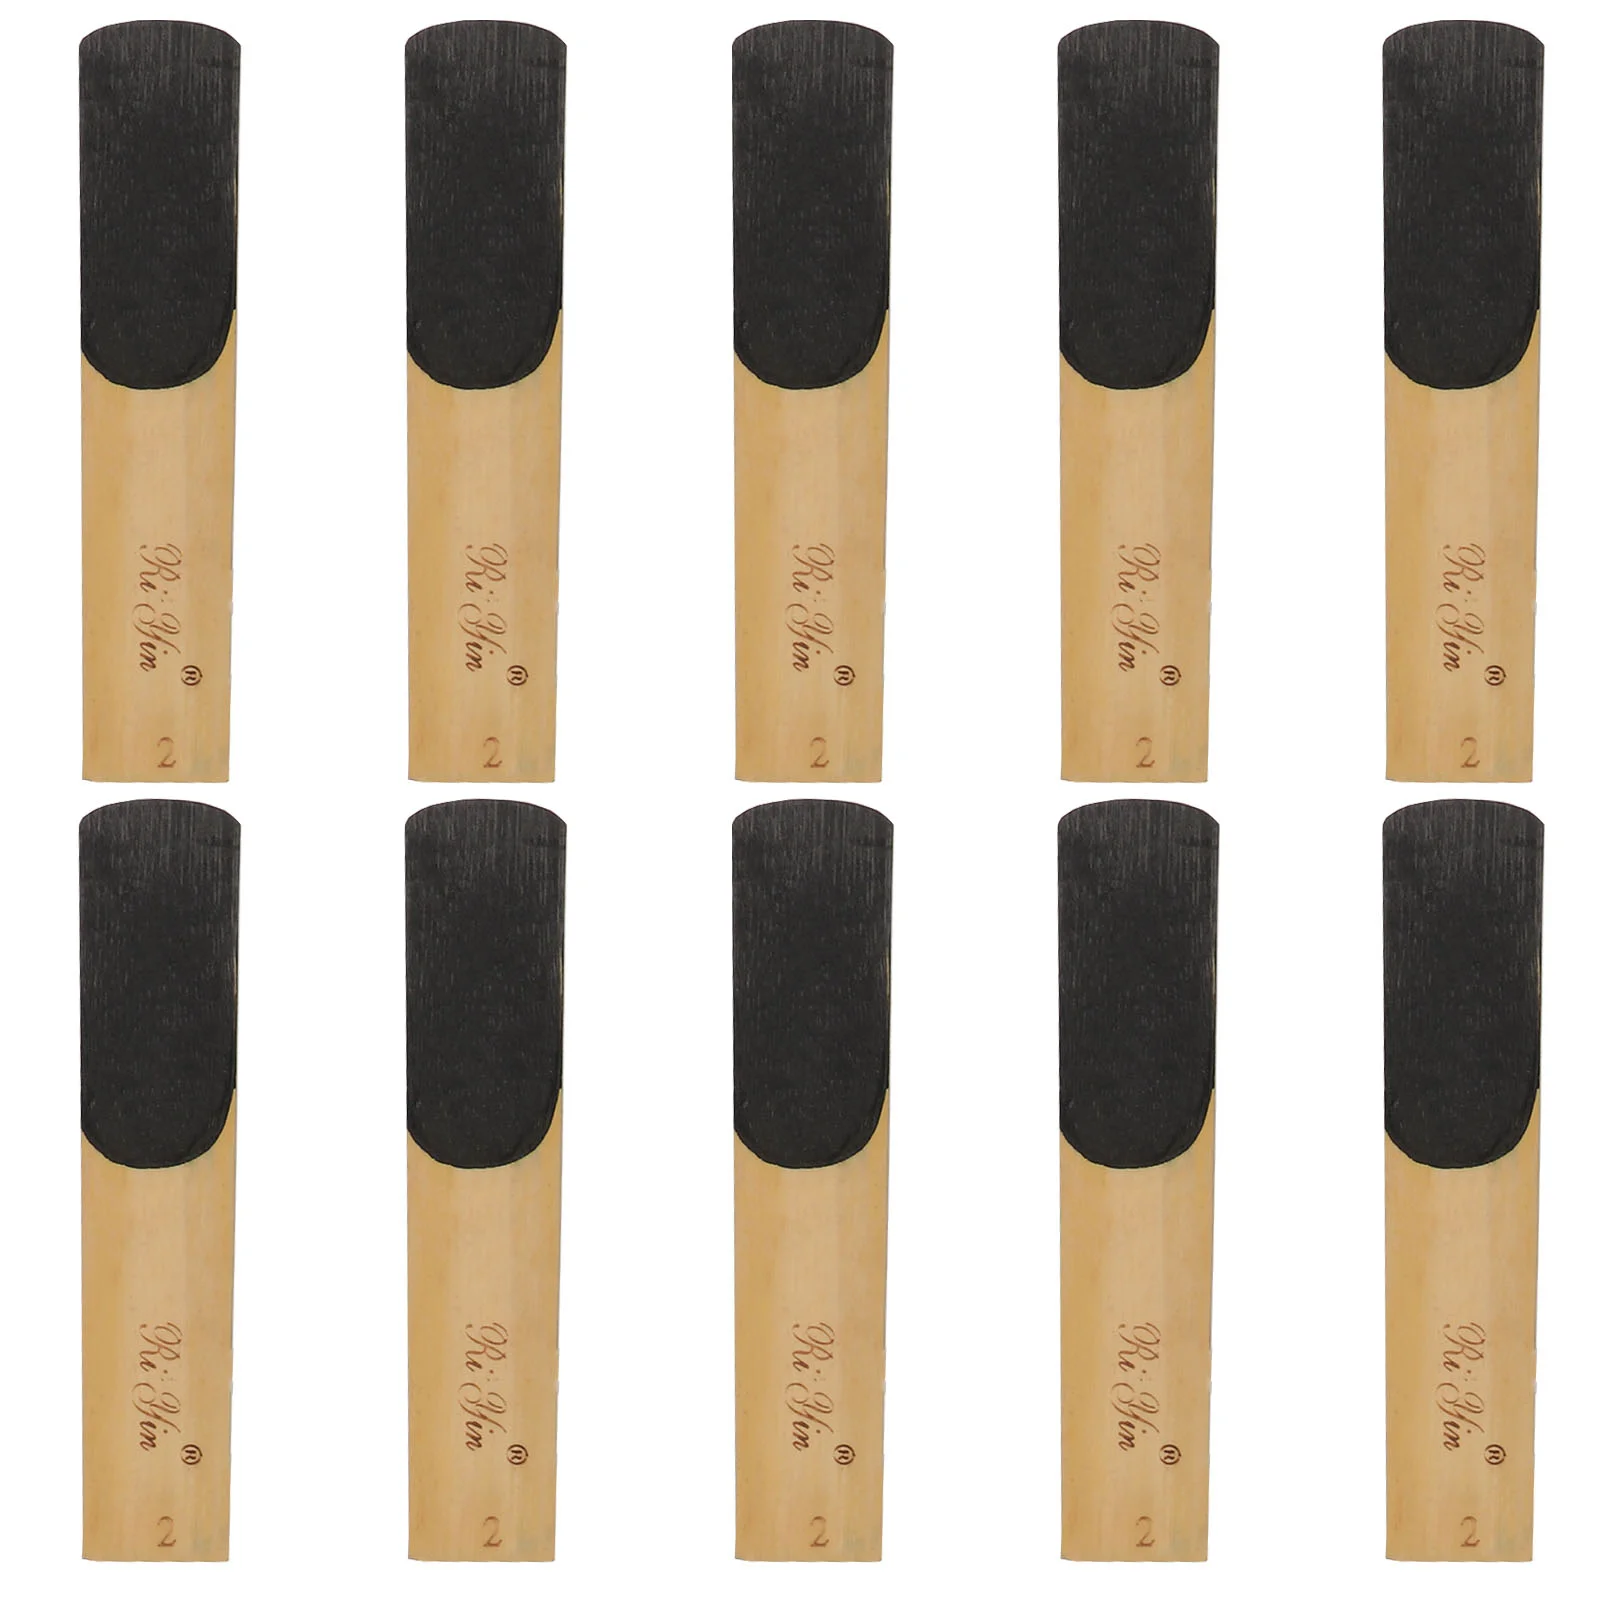 

10 Pcs Saxophone Reed Instrument Parts Strength 20 Reeds Bassoon Plastic Accessory Accessories Tenor Clarinet